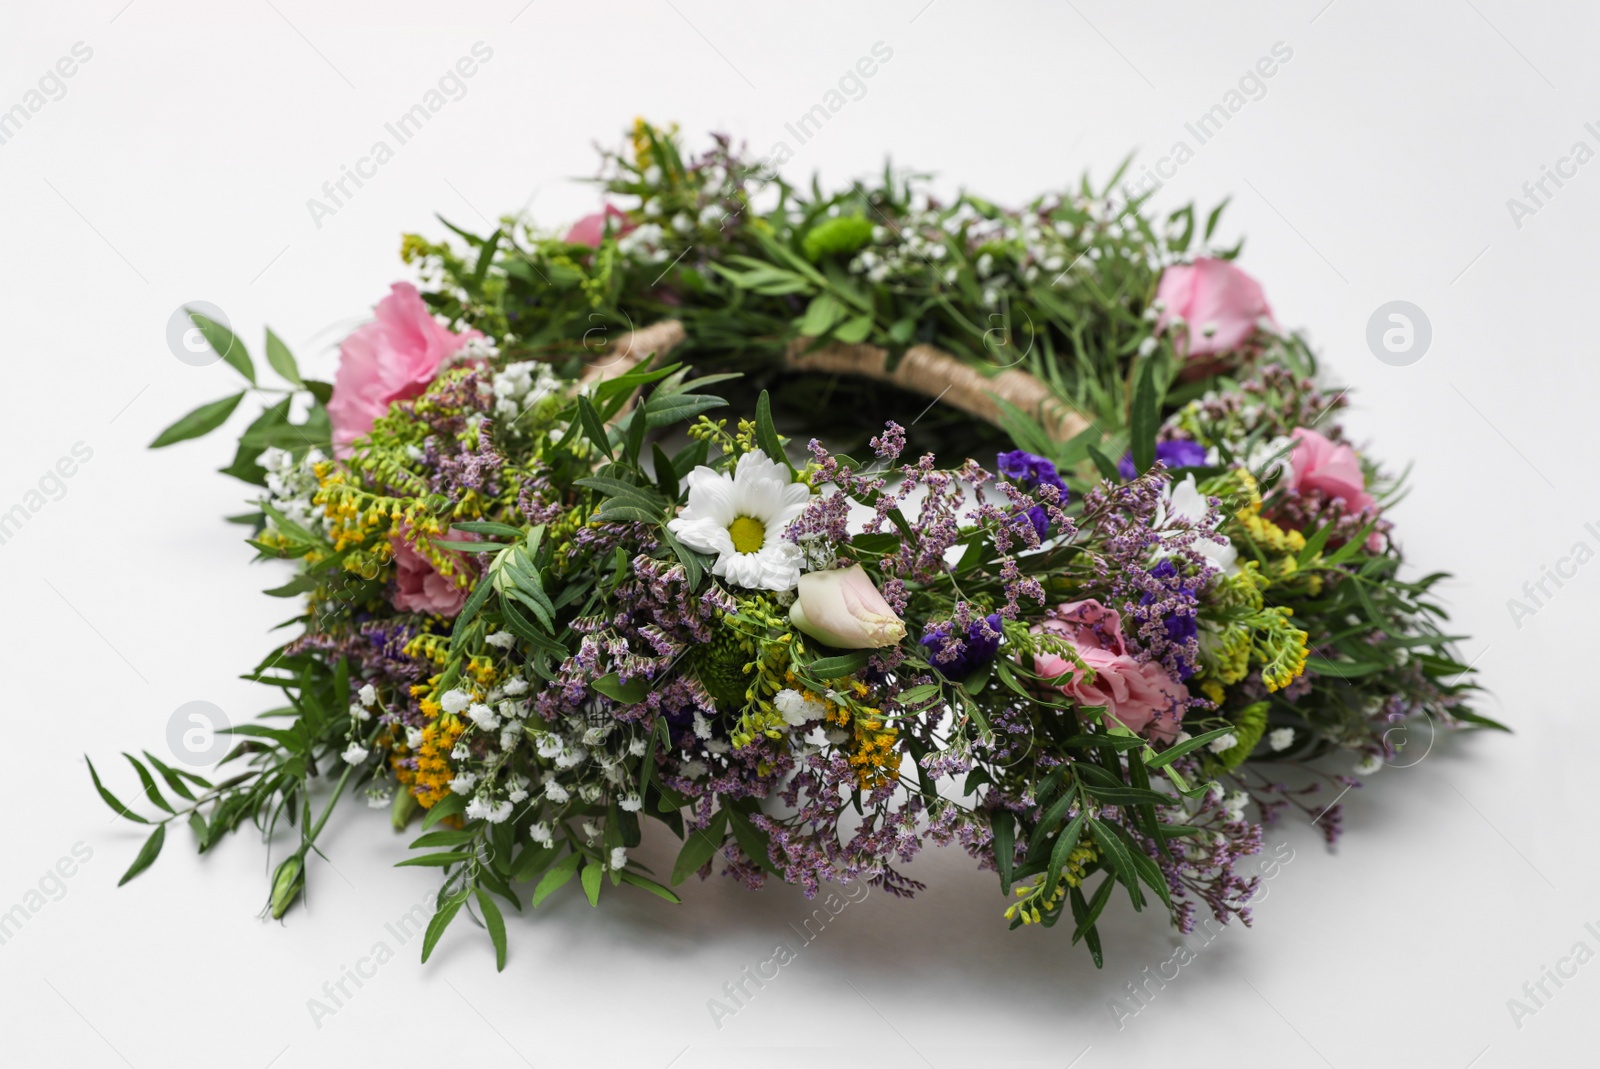 Photo of Wreath made of beautiful flowers on white background, closeup